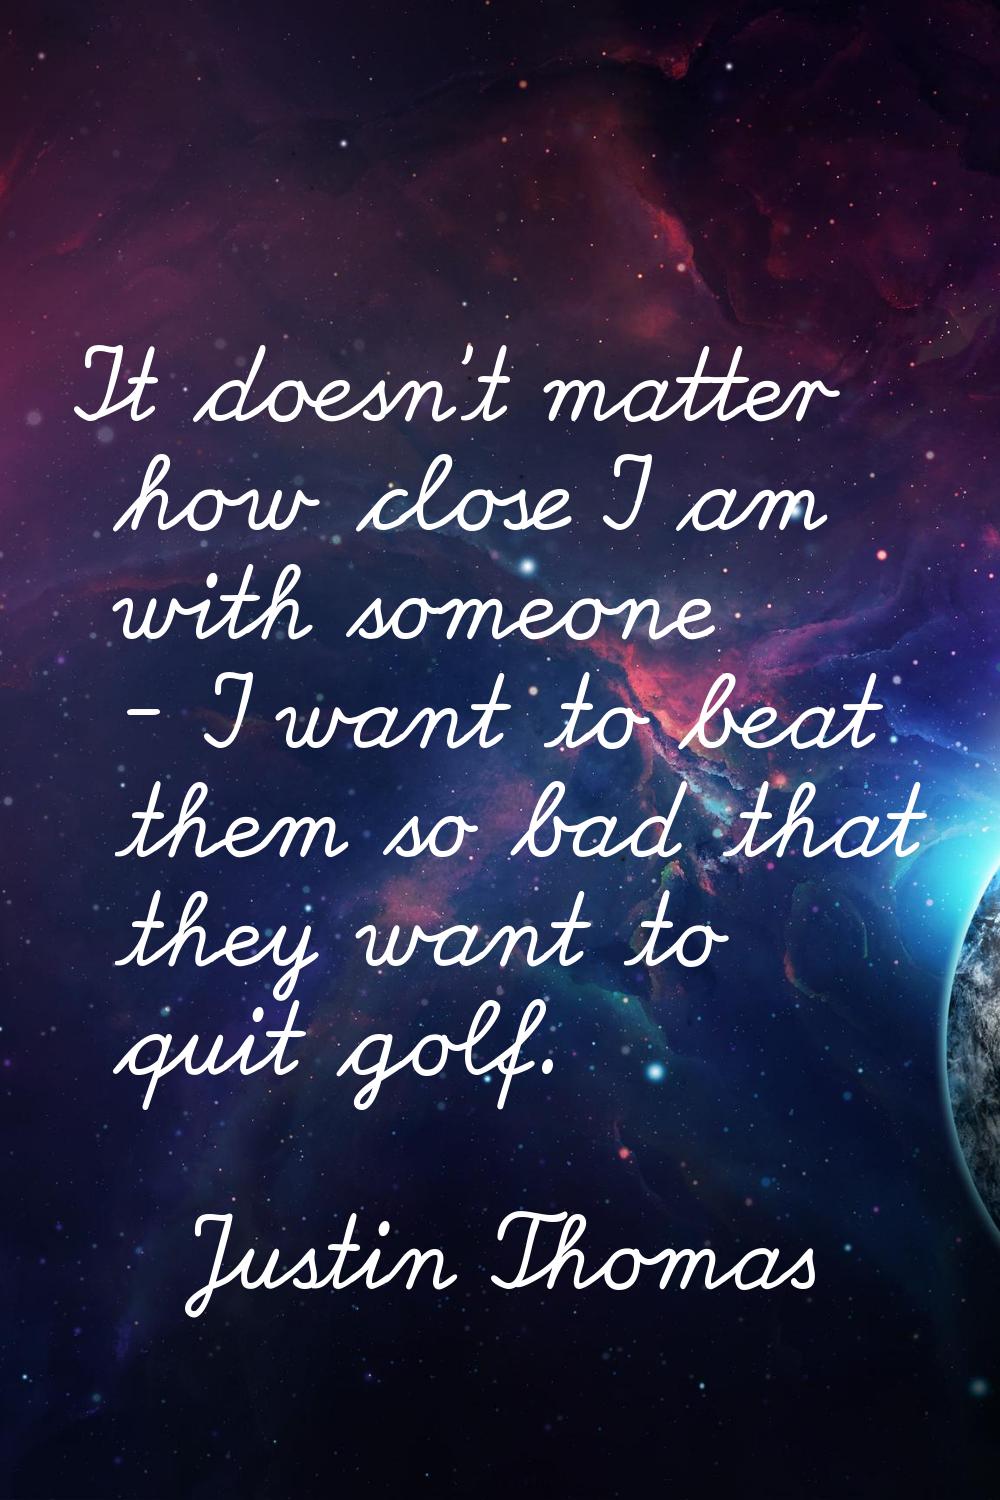 It doesn't matter how close I am with someone - I want to beat them so bad that they want to quit g